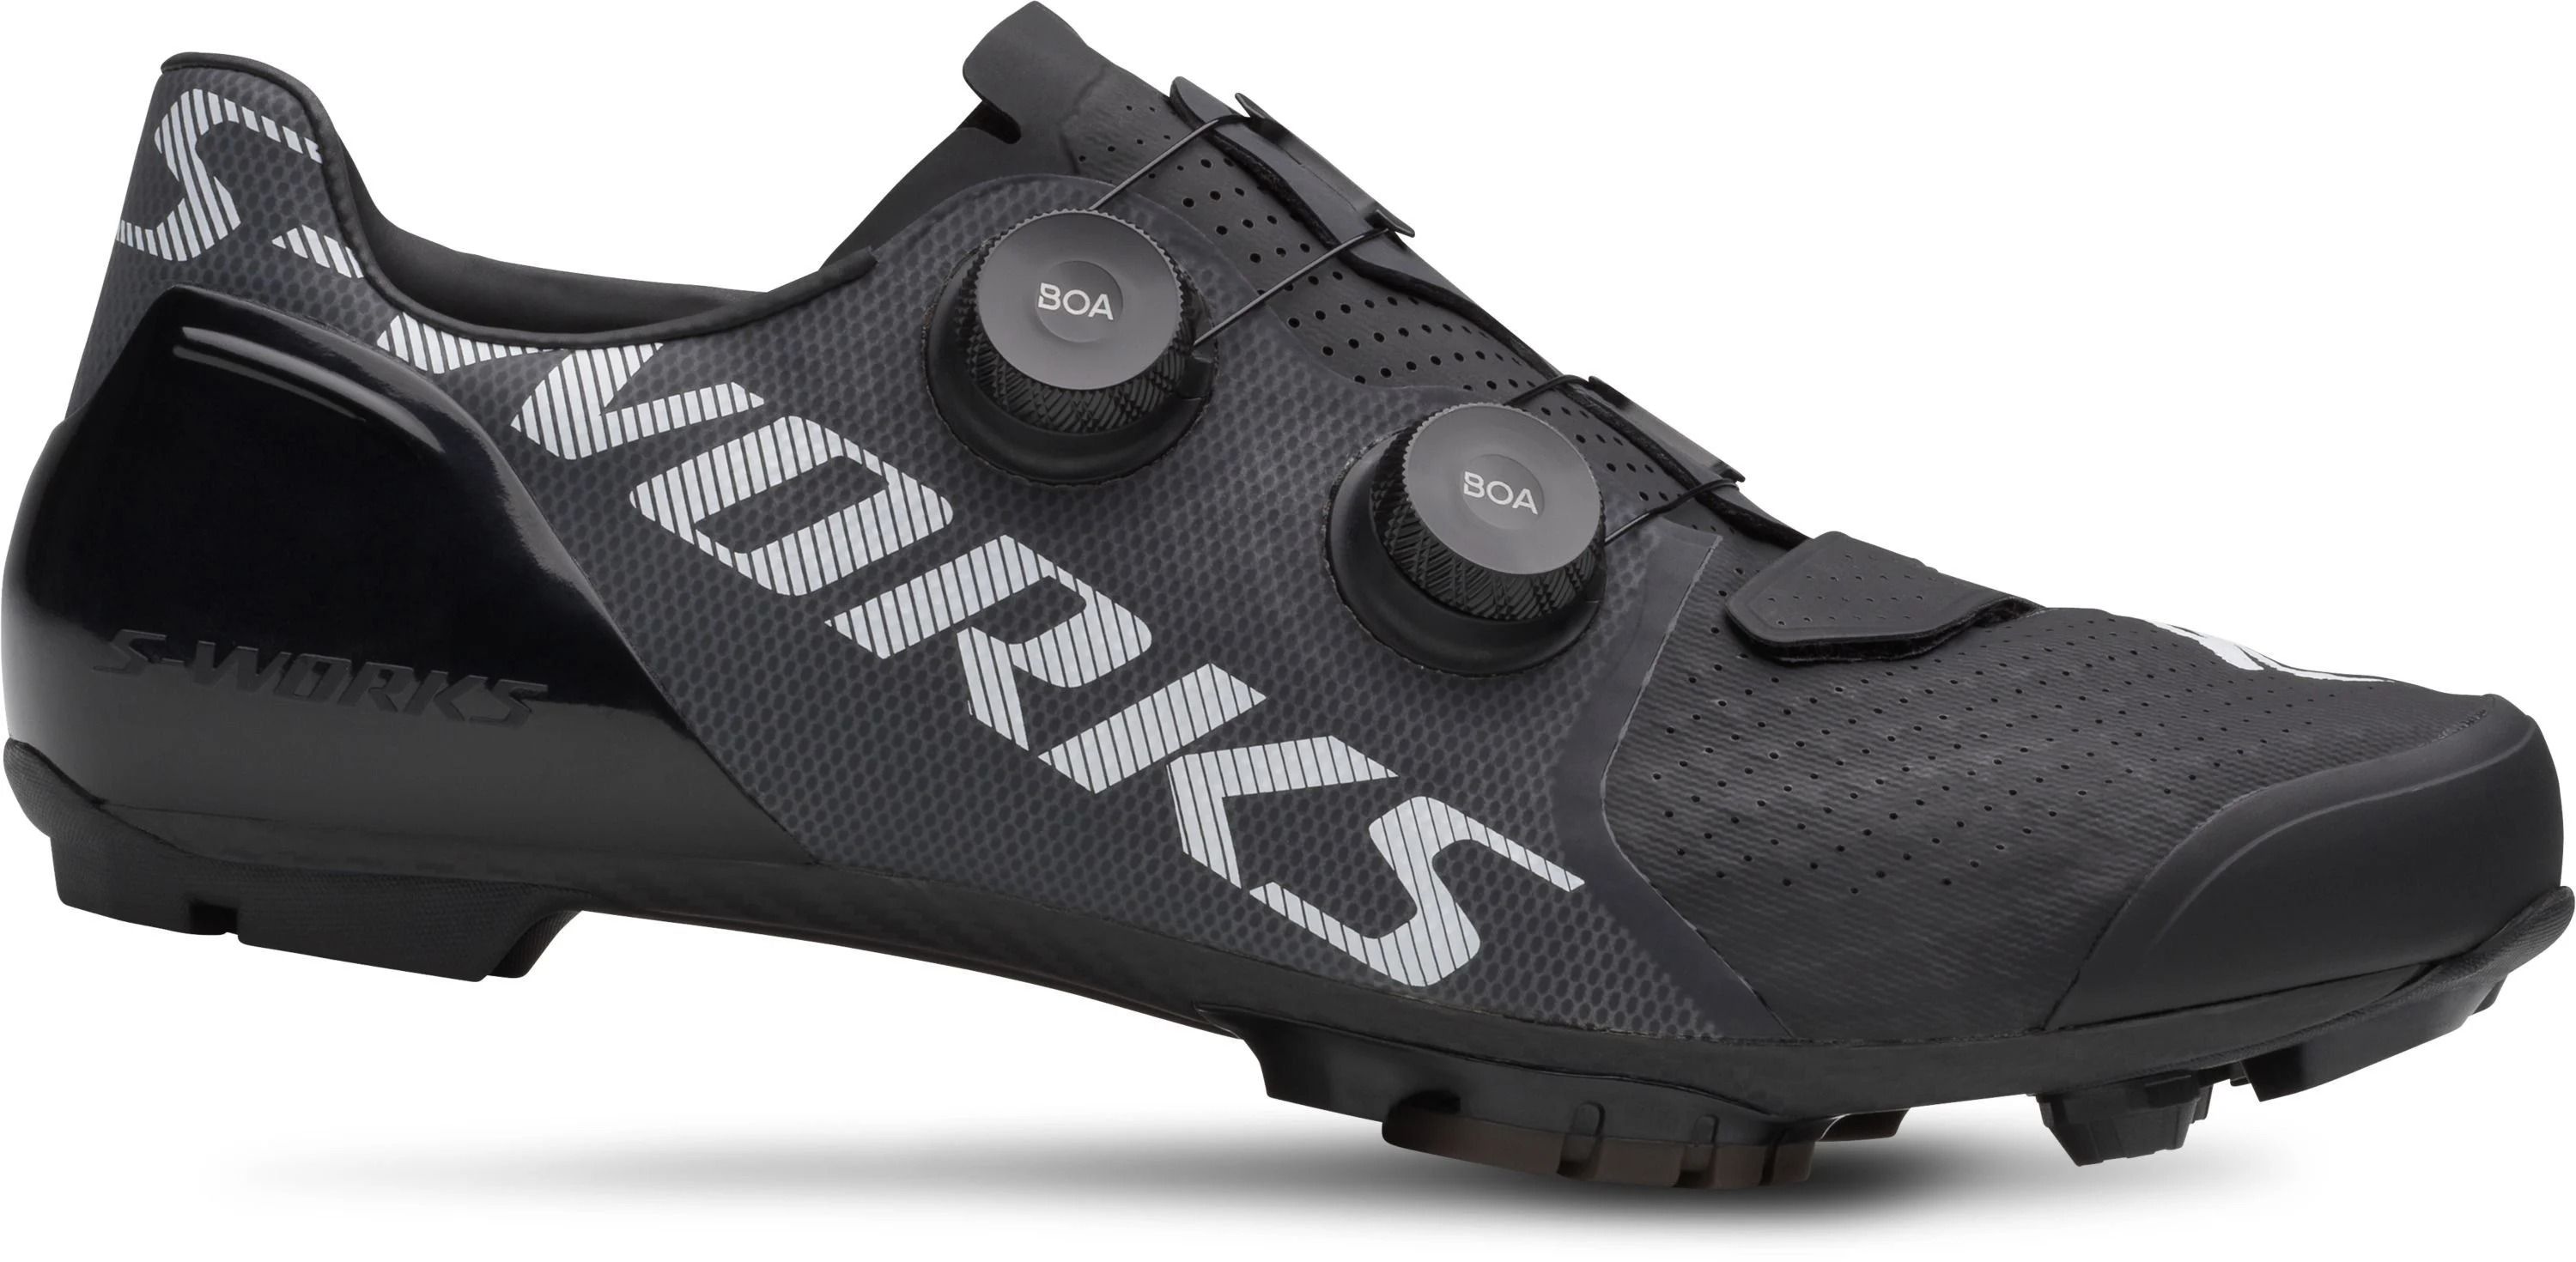 s works xc shoes